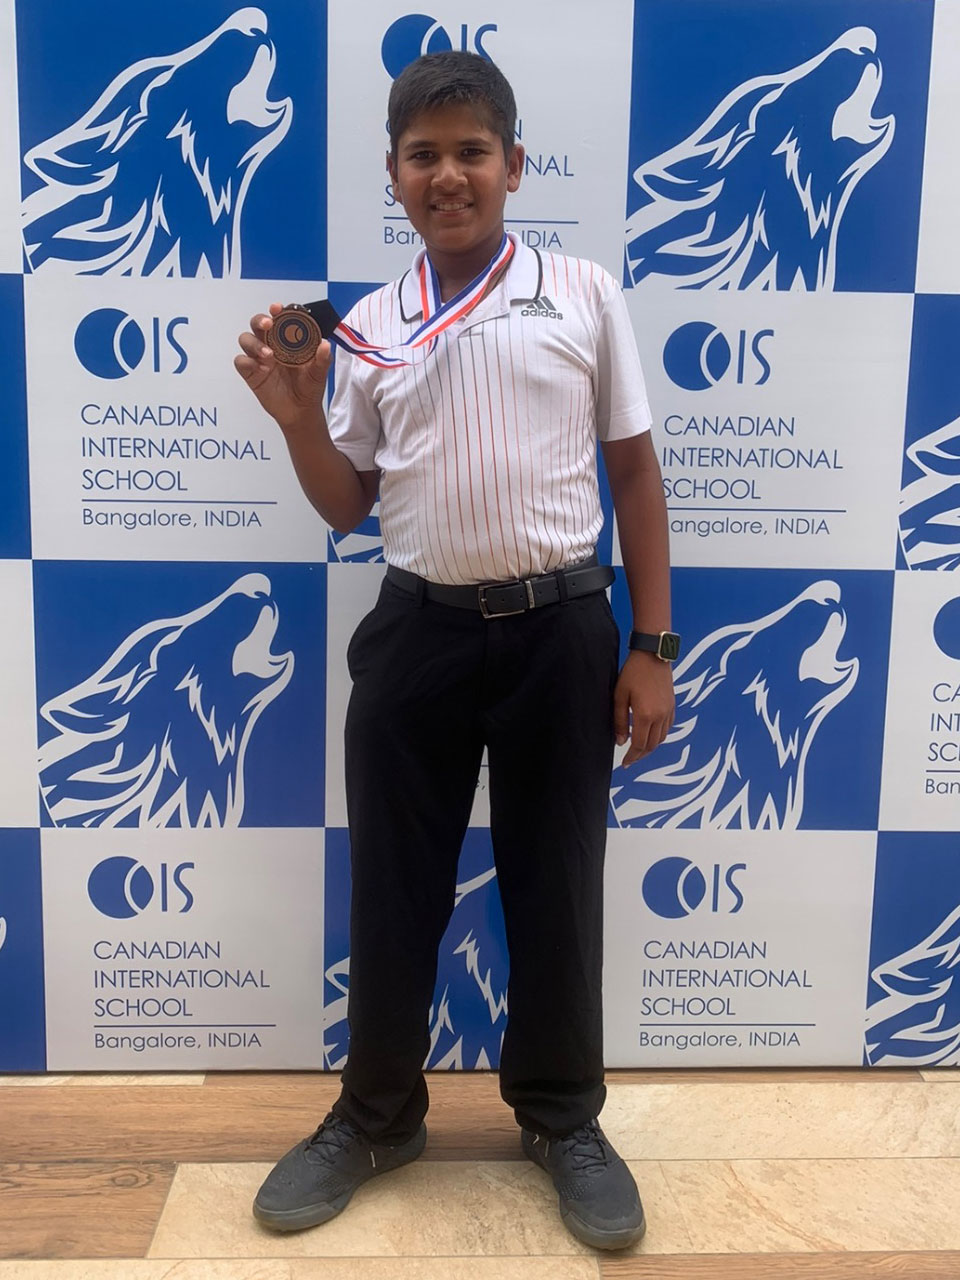 Advay Bagla finishes 3rd in Category C Boys